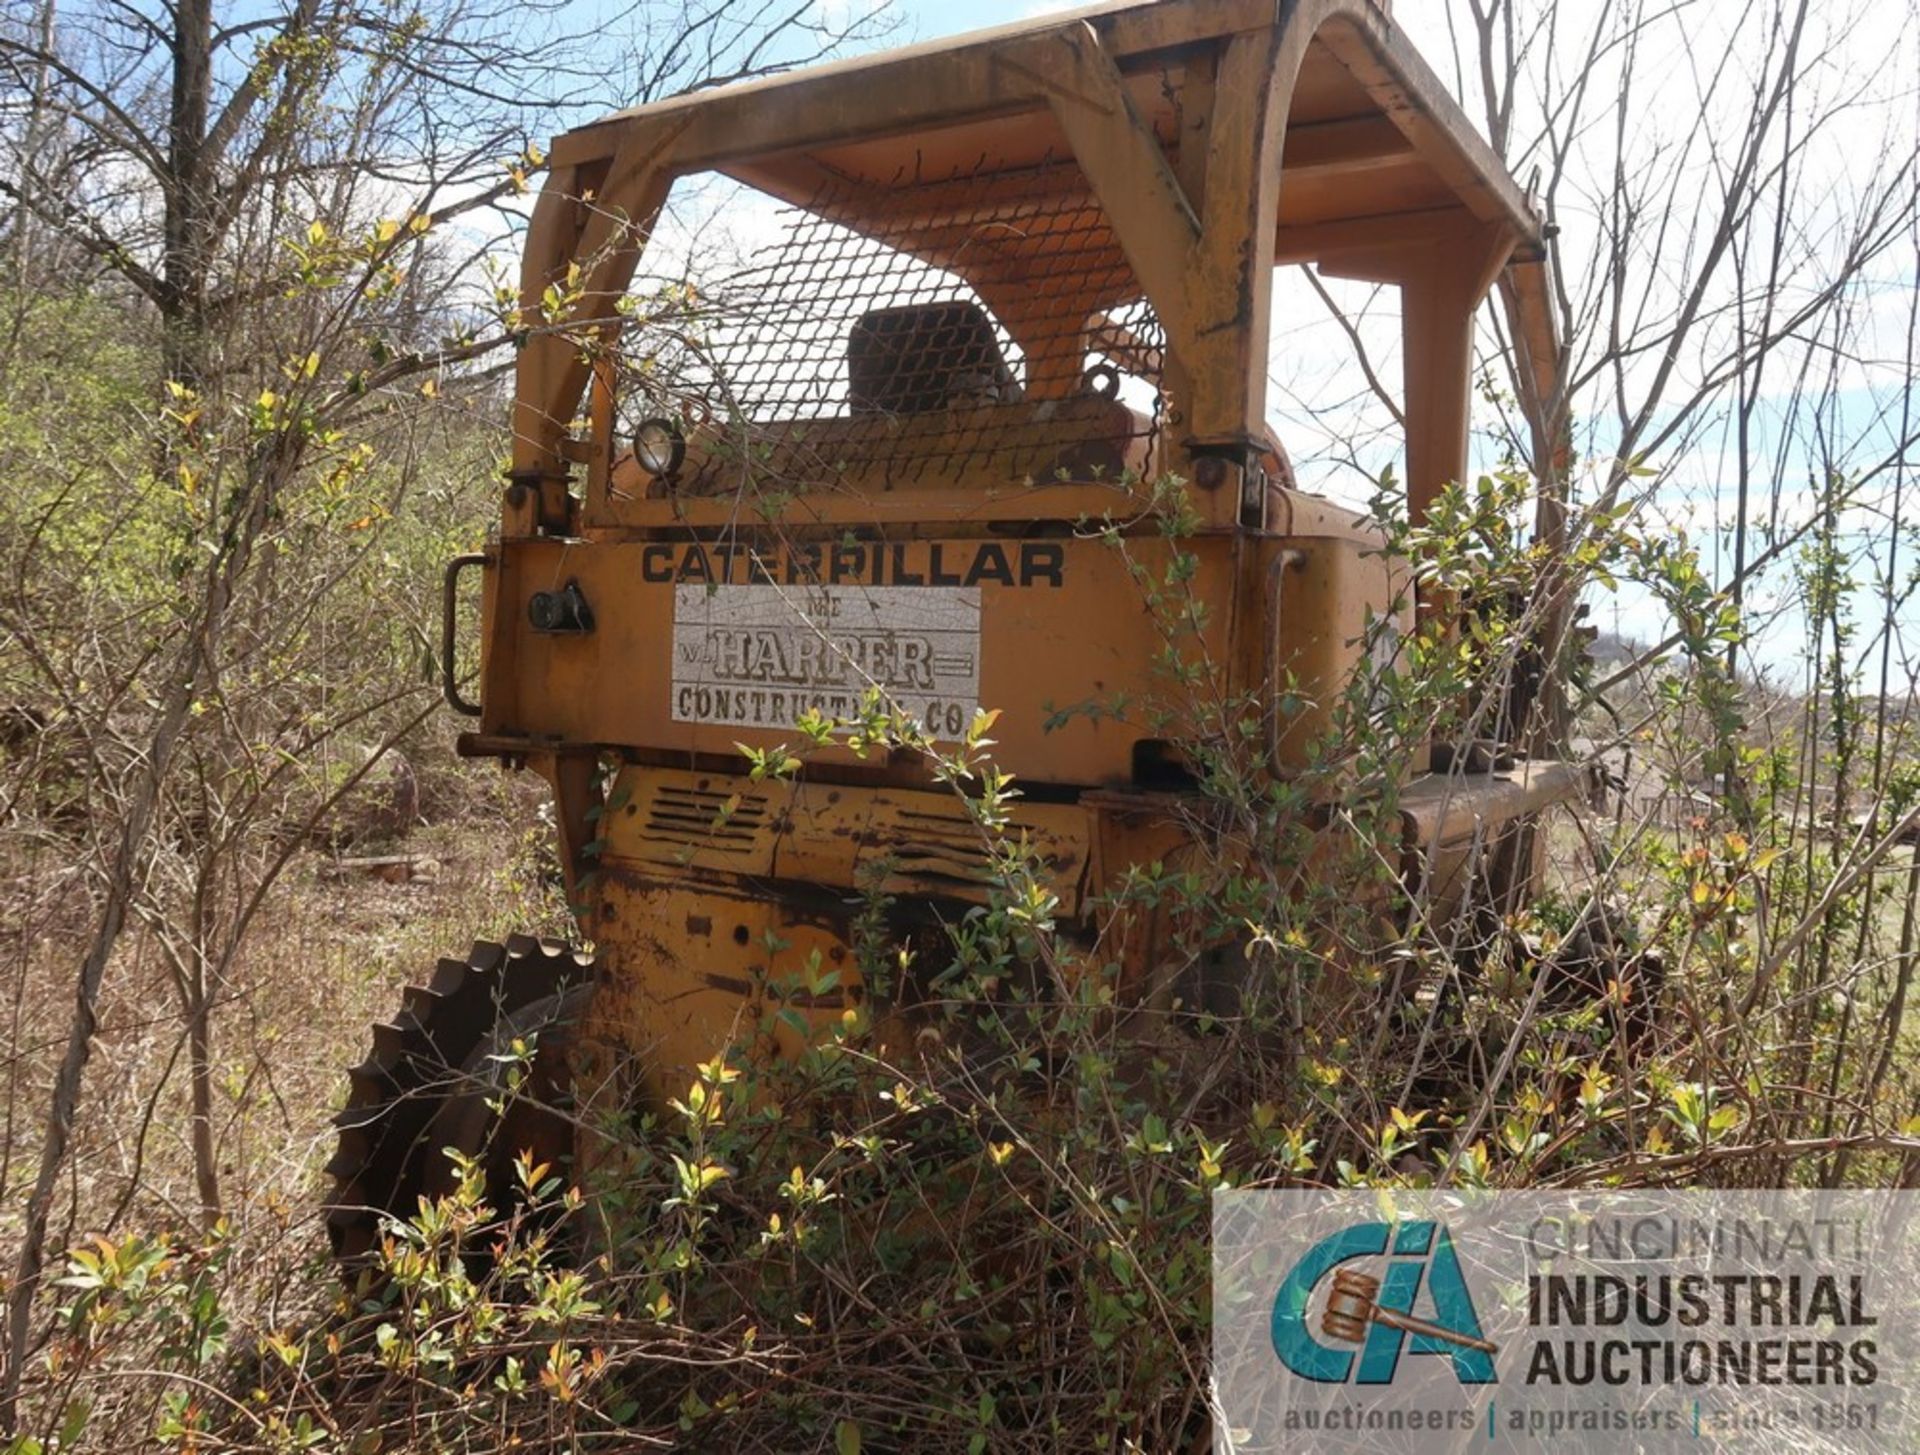 CATERPILLAR MODEL D8H PARTED-OUT CRAWLER DOZIER; S/N N/A, PARTS ONLY DOZIER **LOCATED AT 900 LICKING - Image 3 of 5